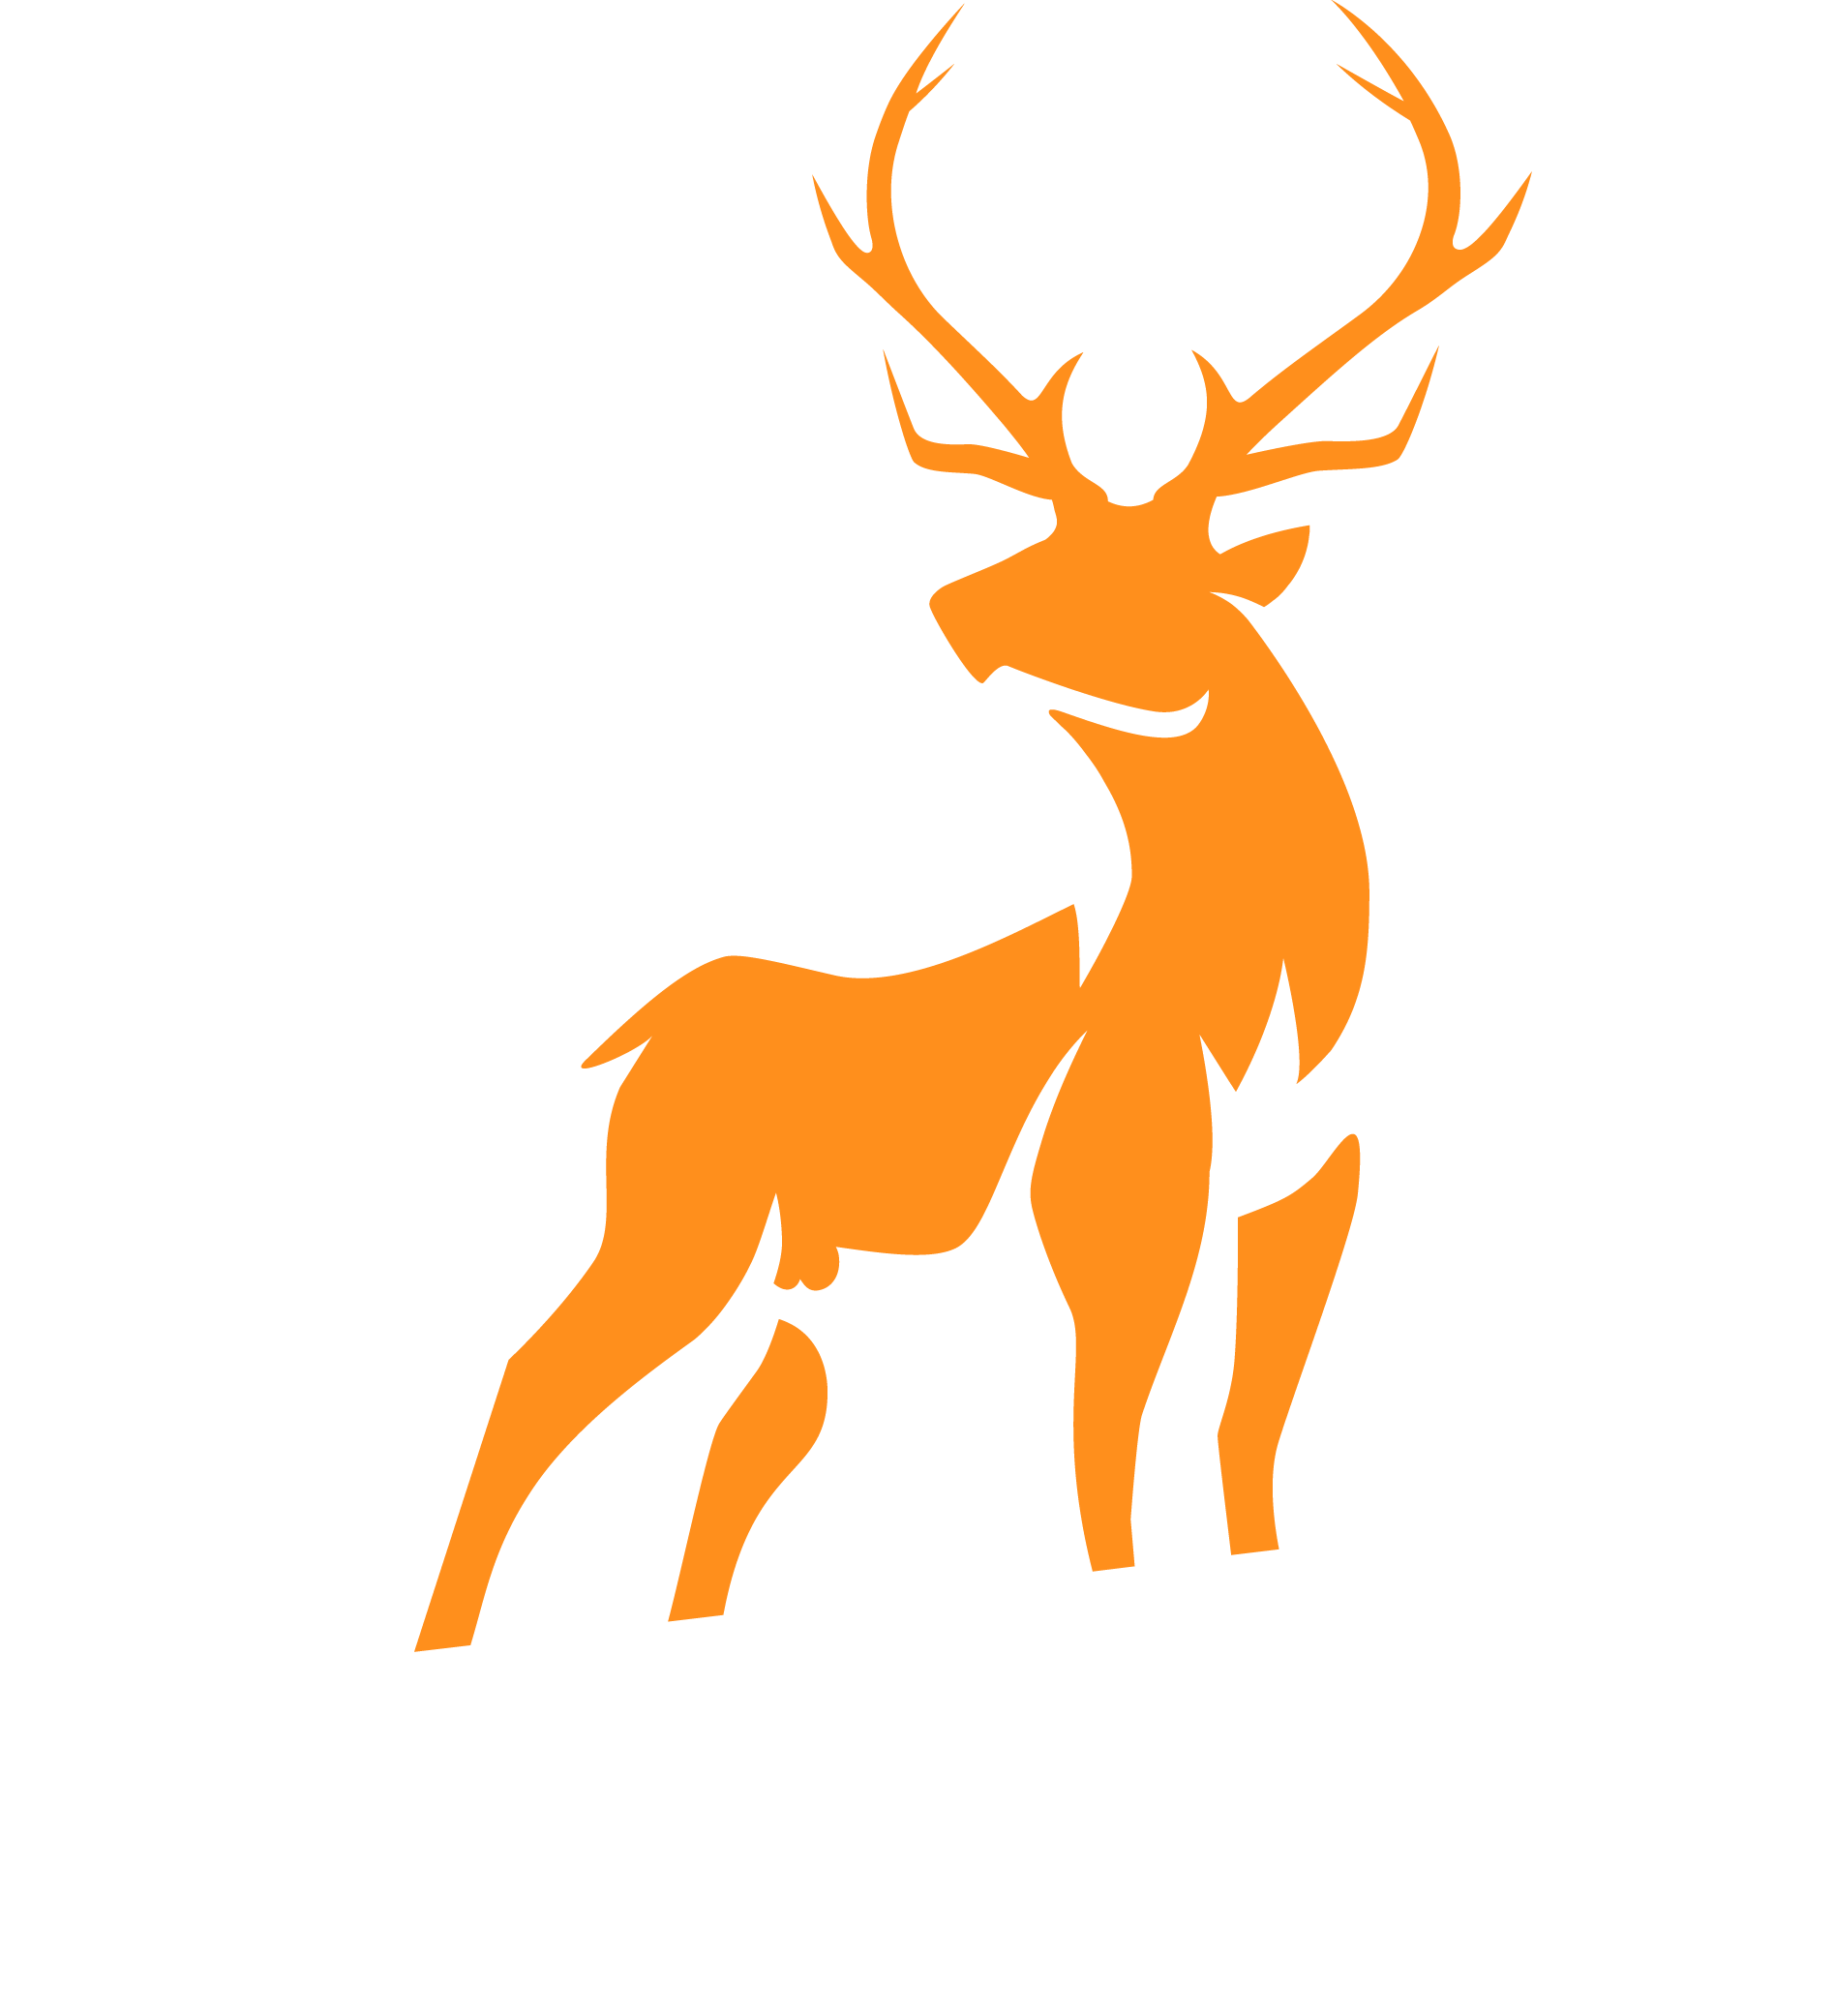 The Stag's Balls logo